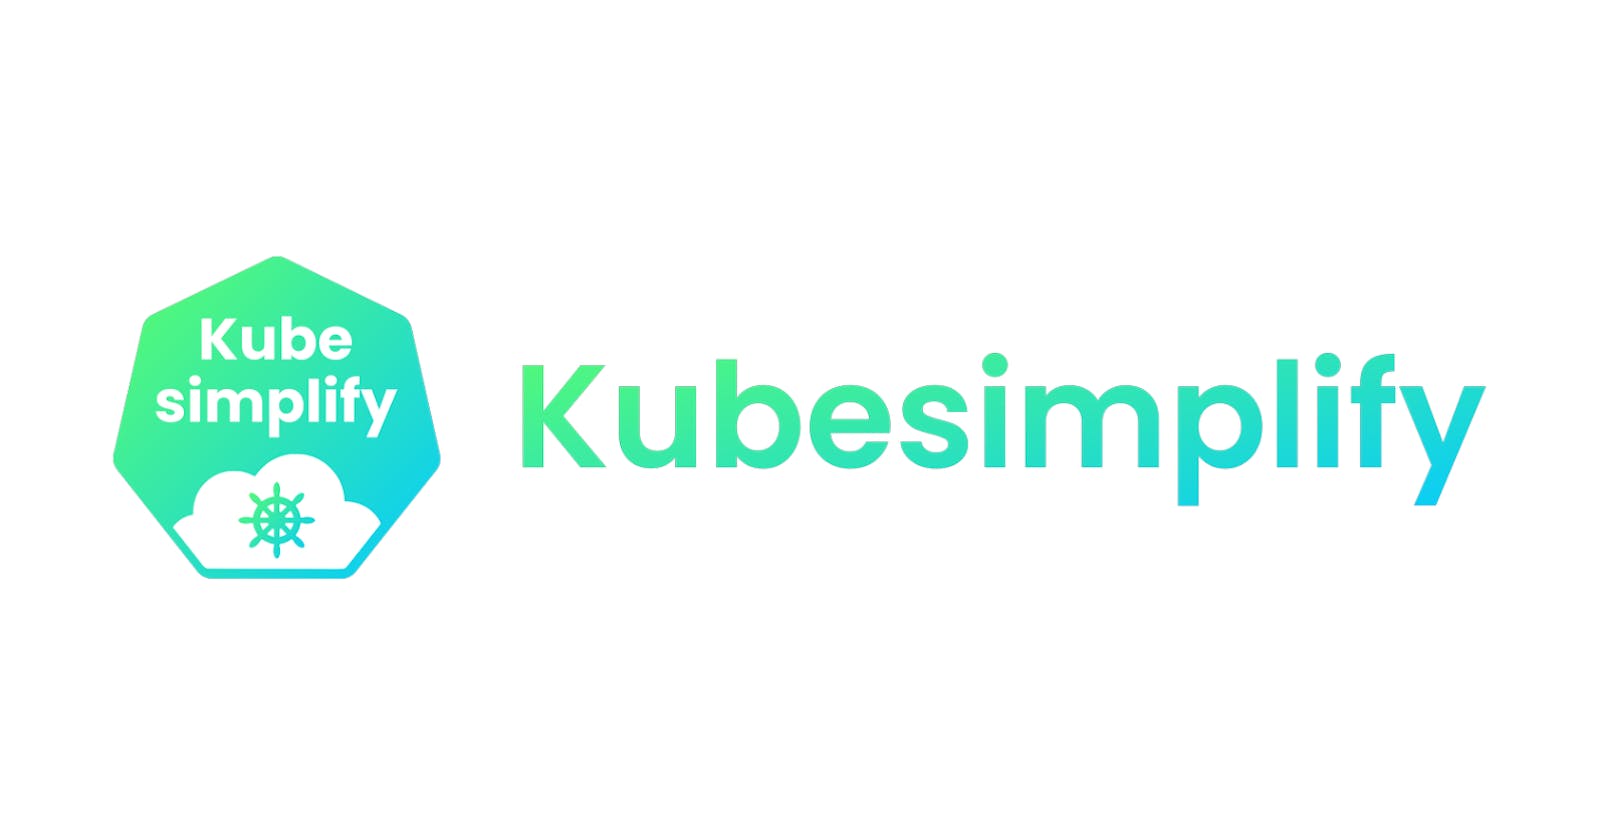 Kubesimplify - A Journey to remember